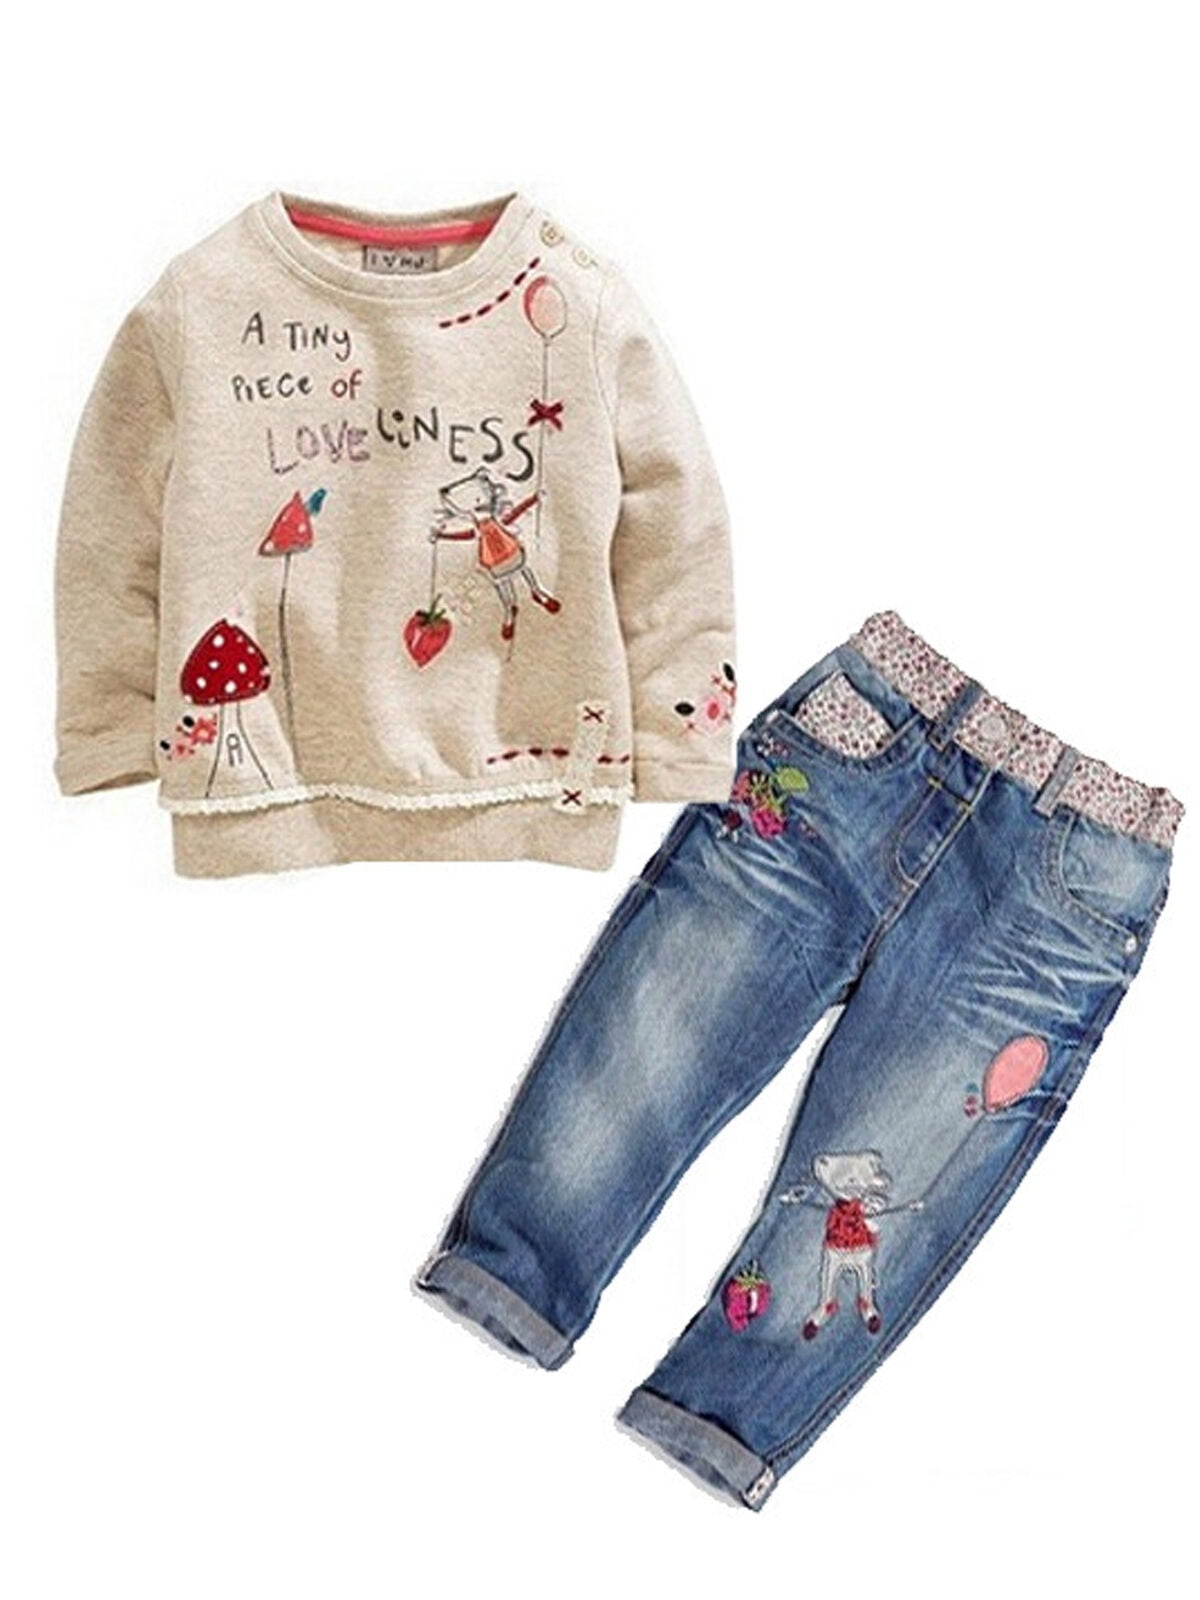 Cute Baby Boys Girls Sweatshirt Printted Tops and Long Pants Outfits Autumn Winter Clothes Clode for 2-7 Years Old Girls